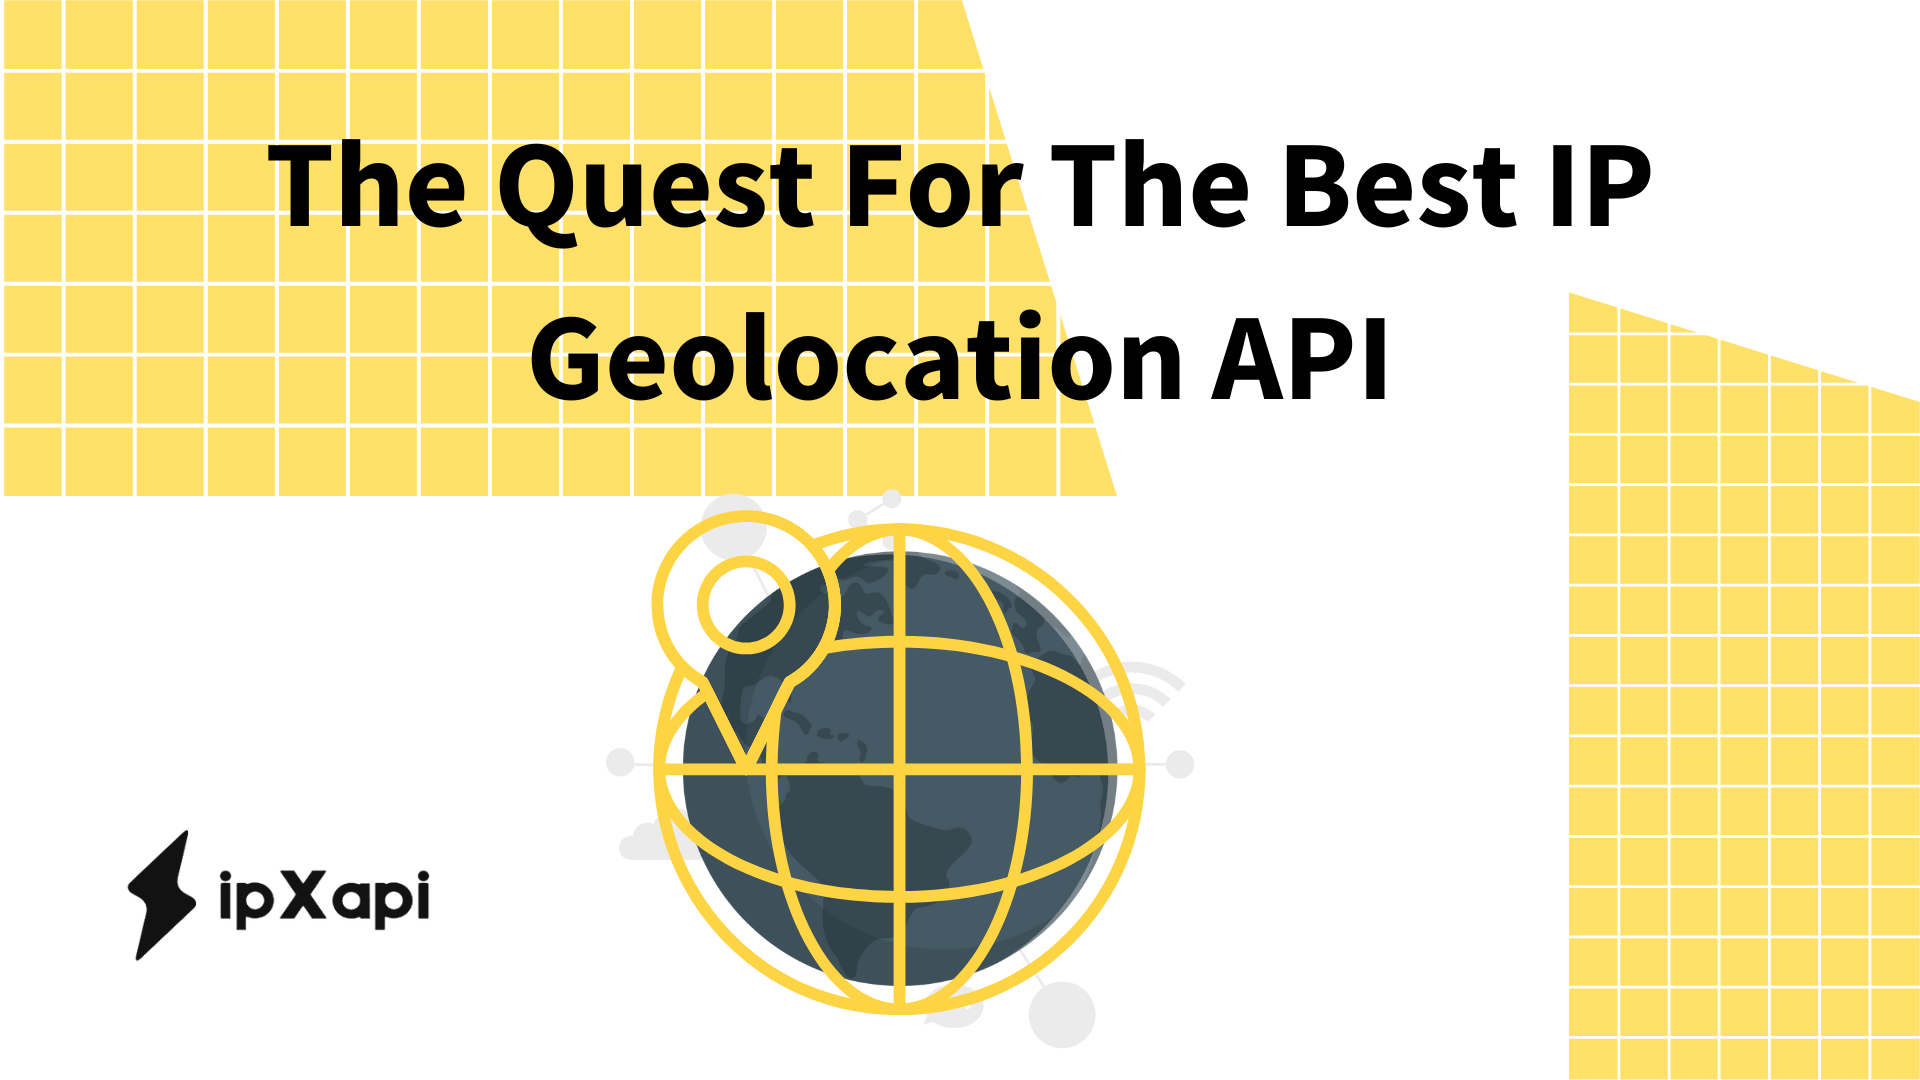 The Quest For The Best IP Geolocation API